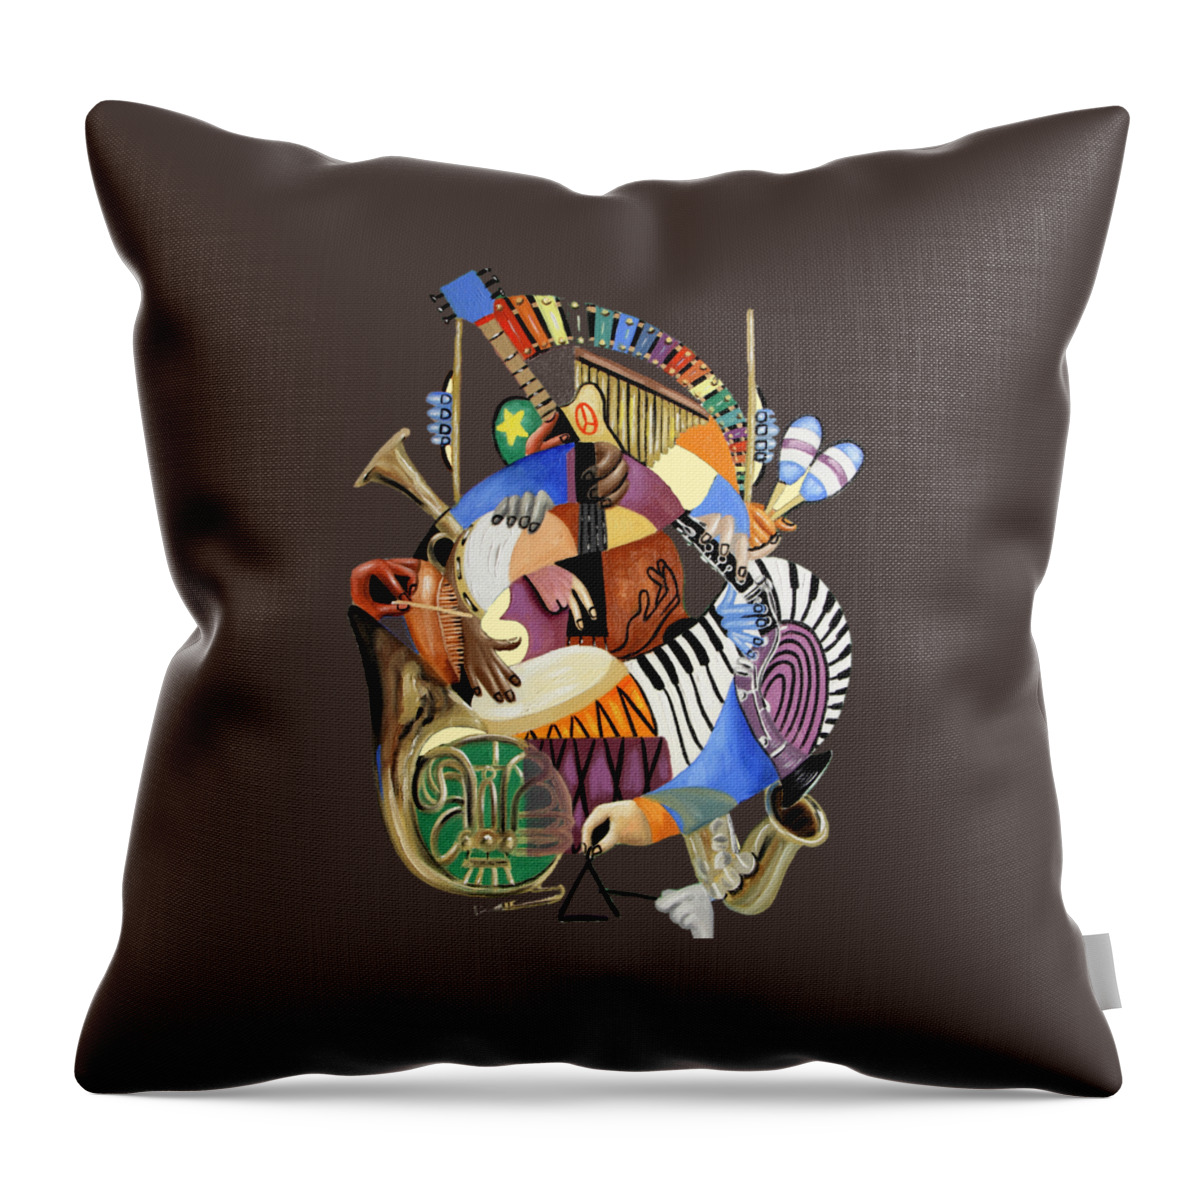 The Sounds Of Music Throw Pillow featuring the painting The Sound Of Music T-Shirt by Anthony Falbo